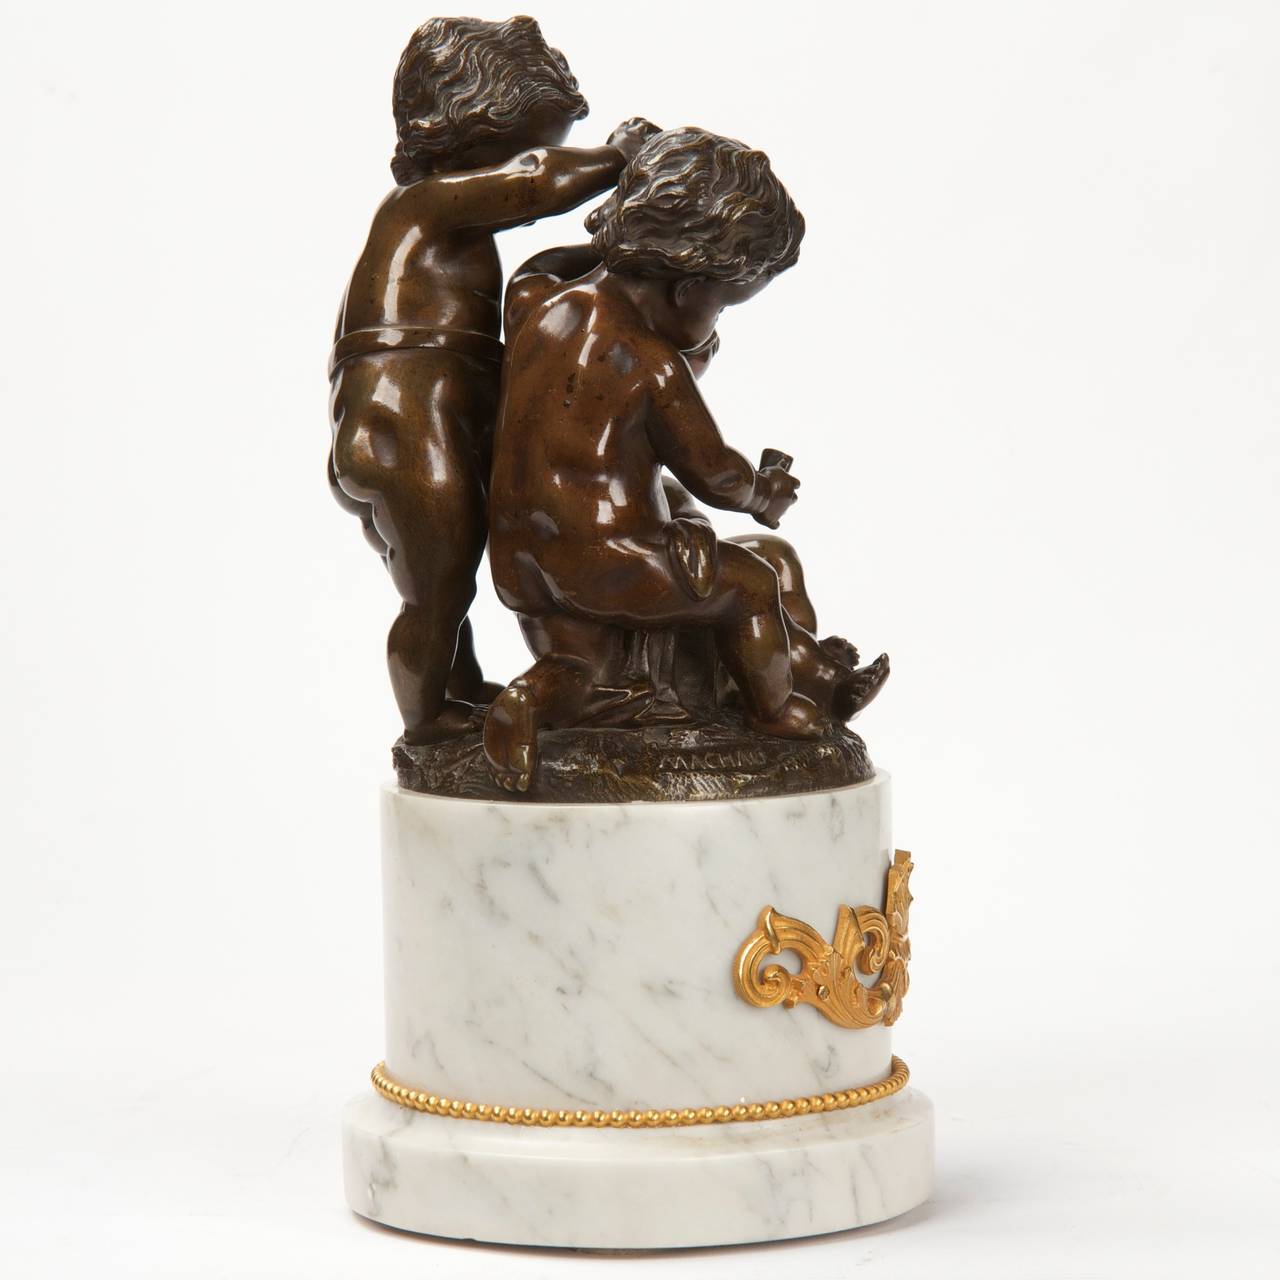 This is a very finely cast sculpture of three putti intensely focused on a game of dice, the standing figure betting his apple on the result of the toss. The three figures are so serious, the seated figure pensive as he counts the dice, the standing